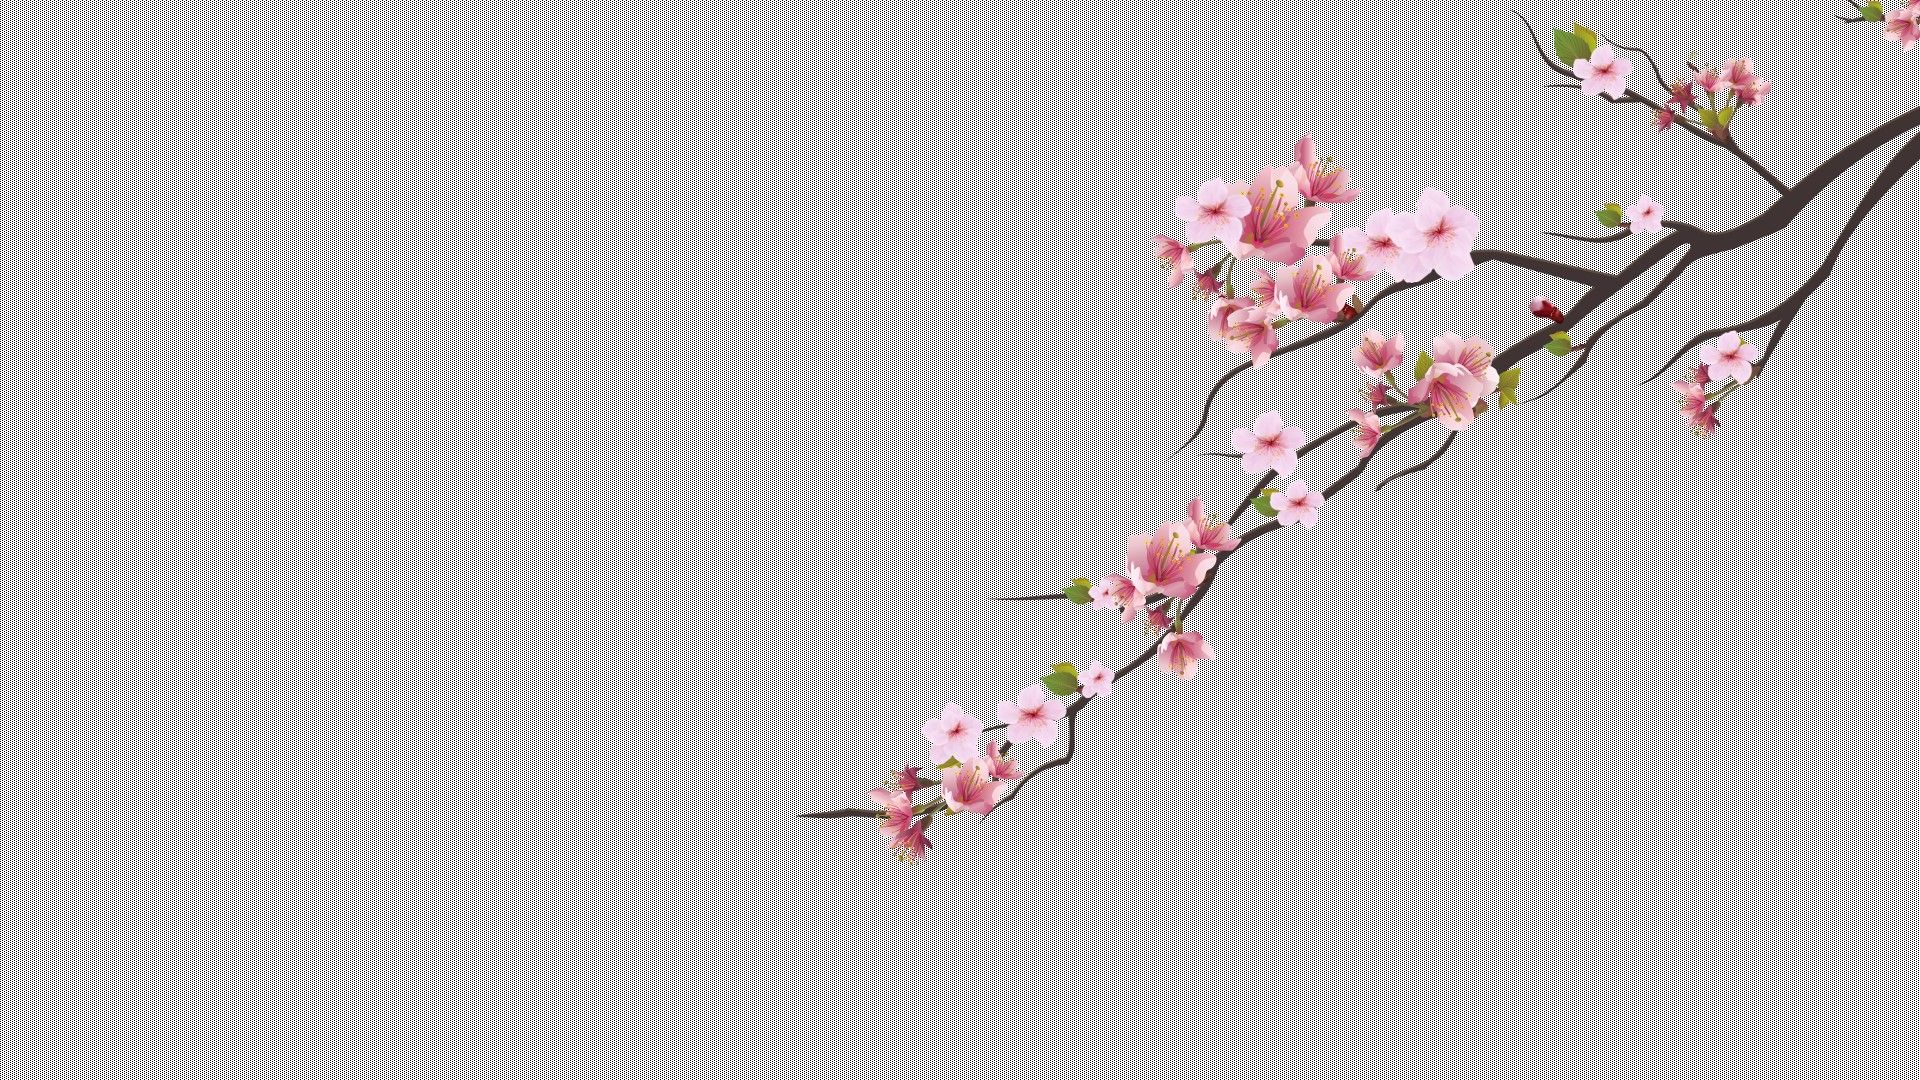 cherry trees, Cherry blossom, Minimalism, Dots, Pink flower Wallpaper HD / Desktop and Mobile Background